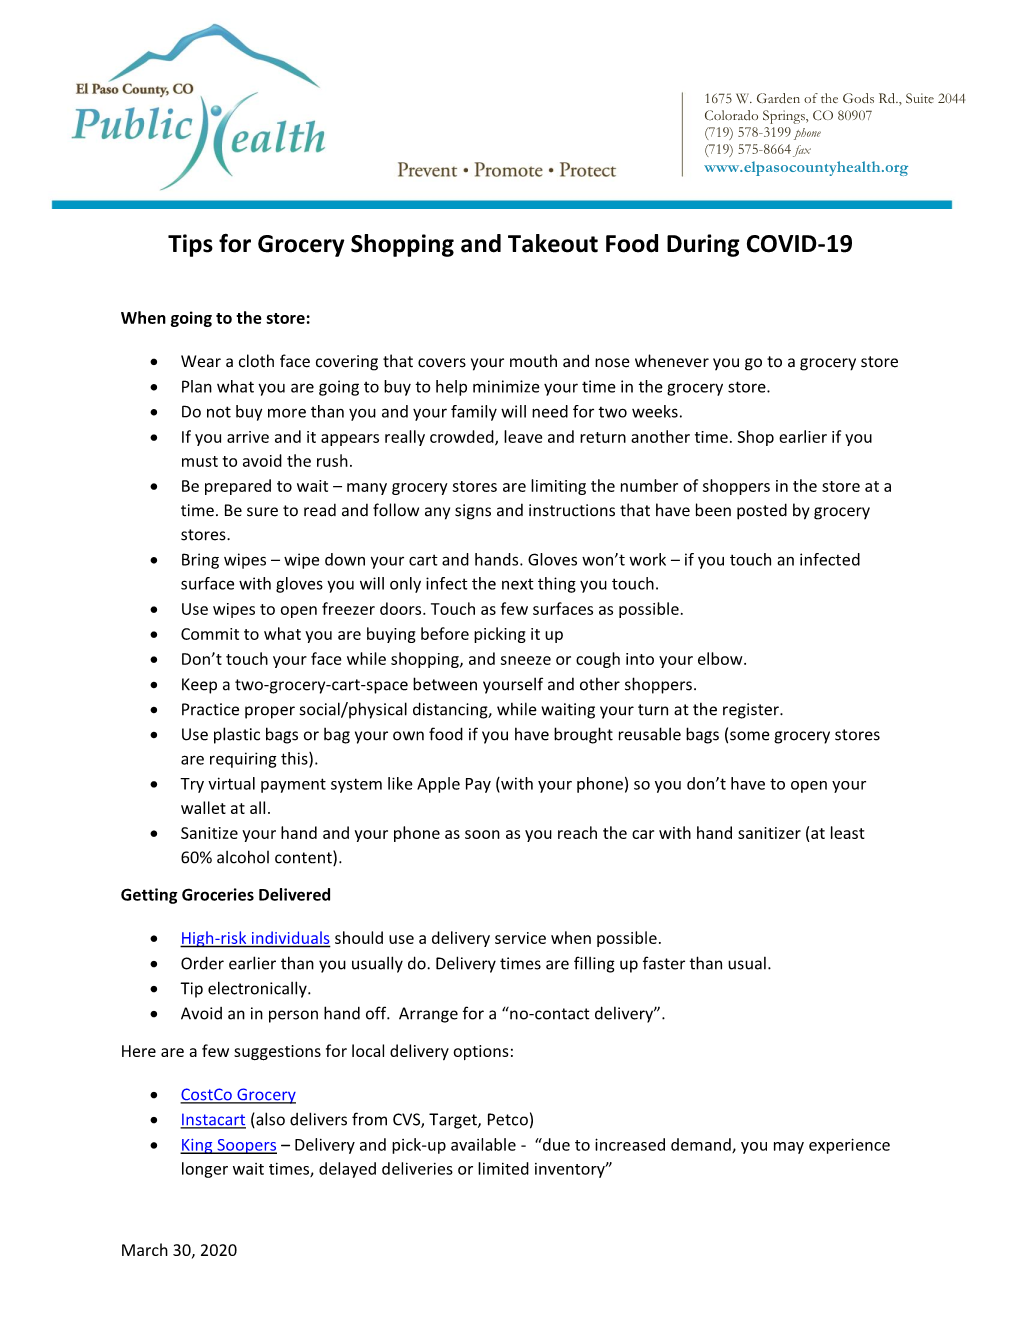 Tips for Grocery Shopping and Takeout Food During COVID-19